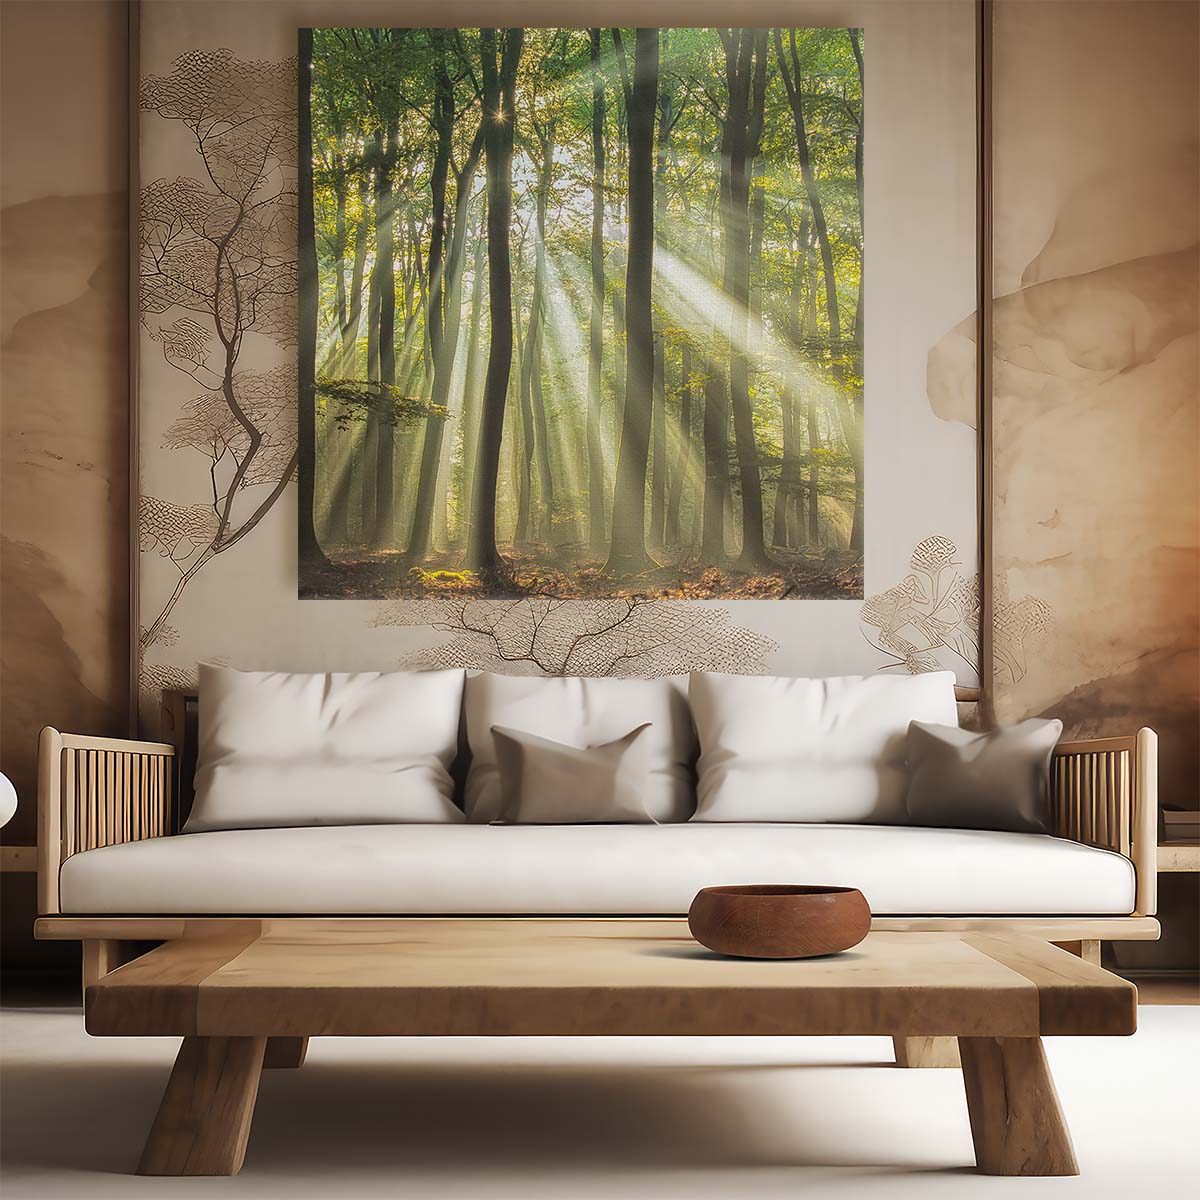 Enchanted Forest Dawn Summer Landscape Photography Wall Art by Luxuriance Designs. Made in USA.